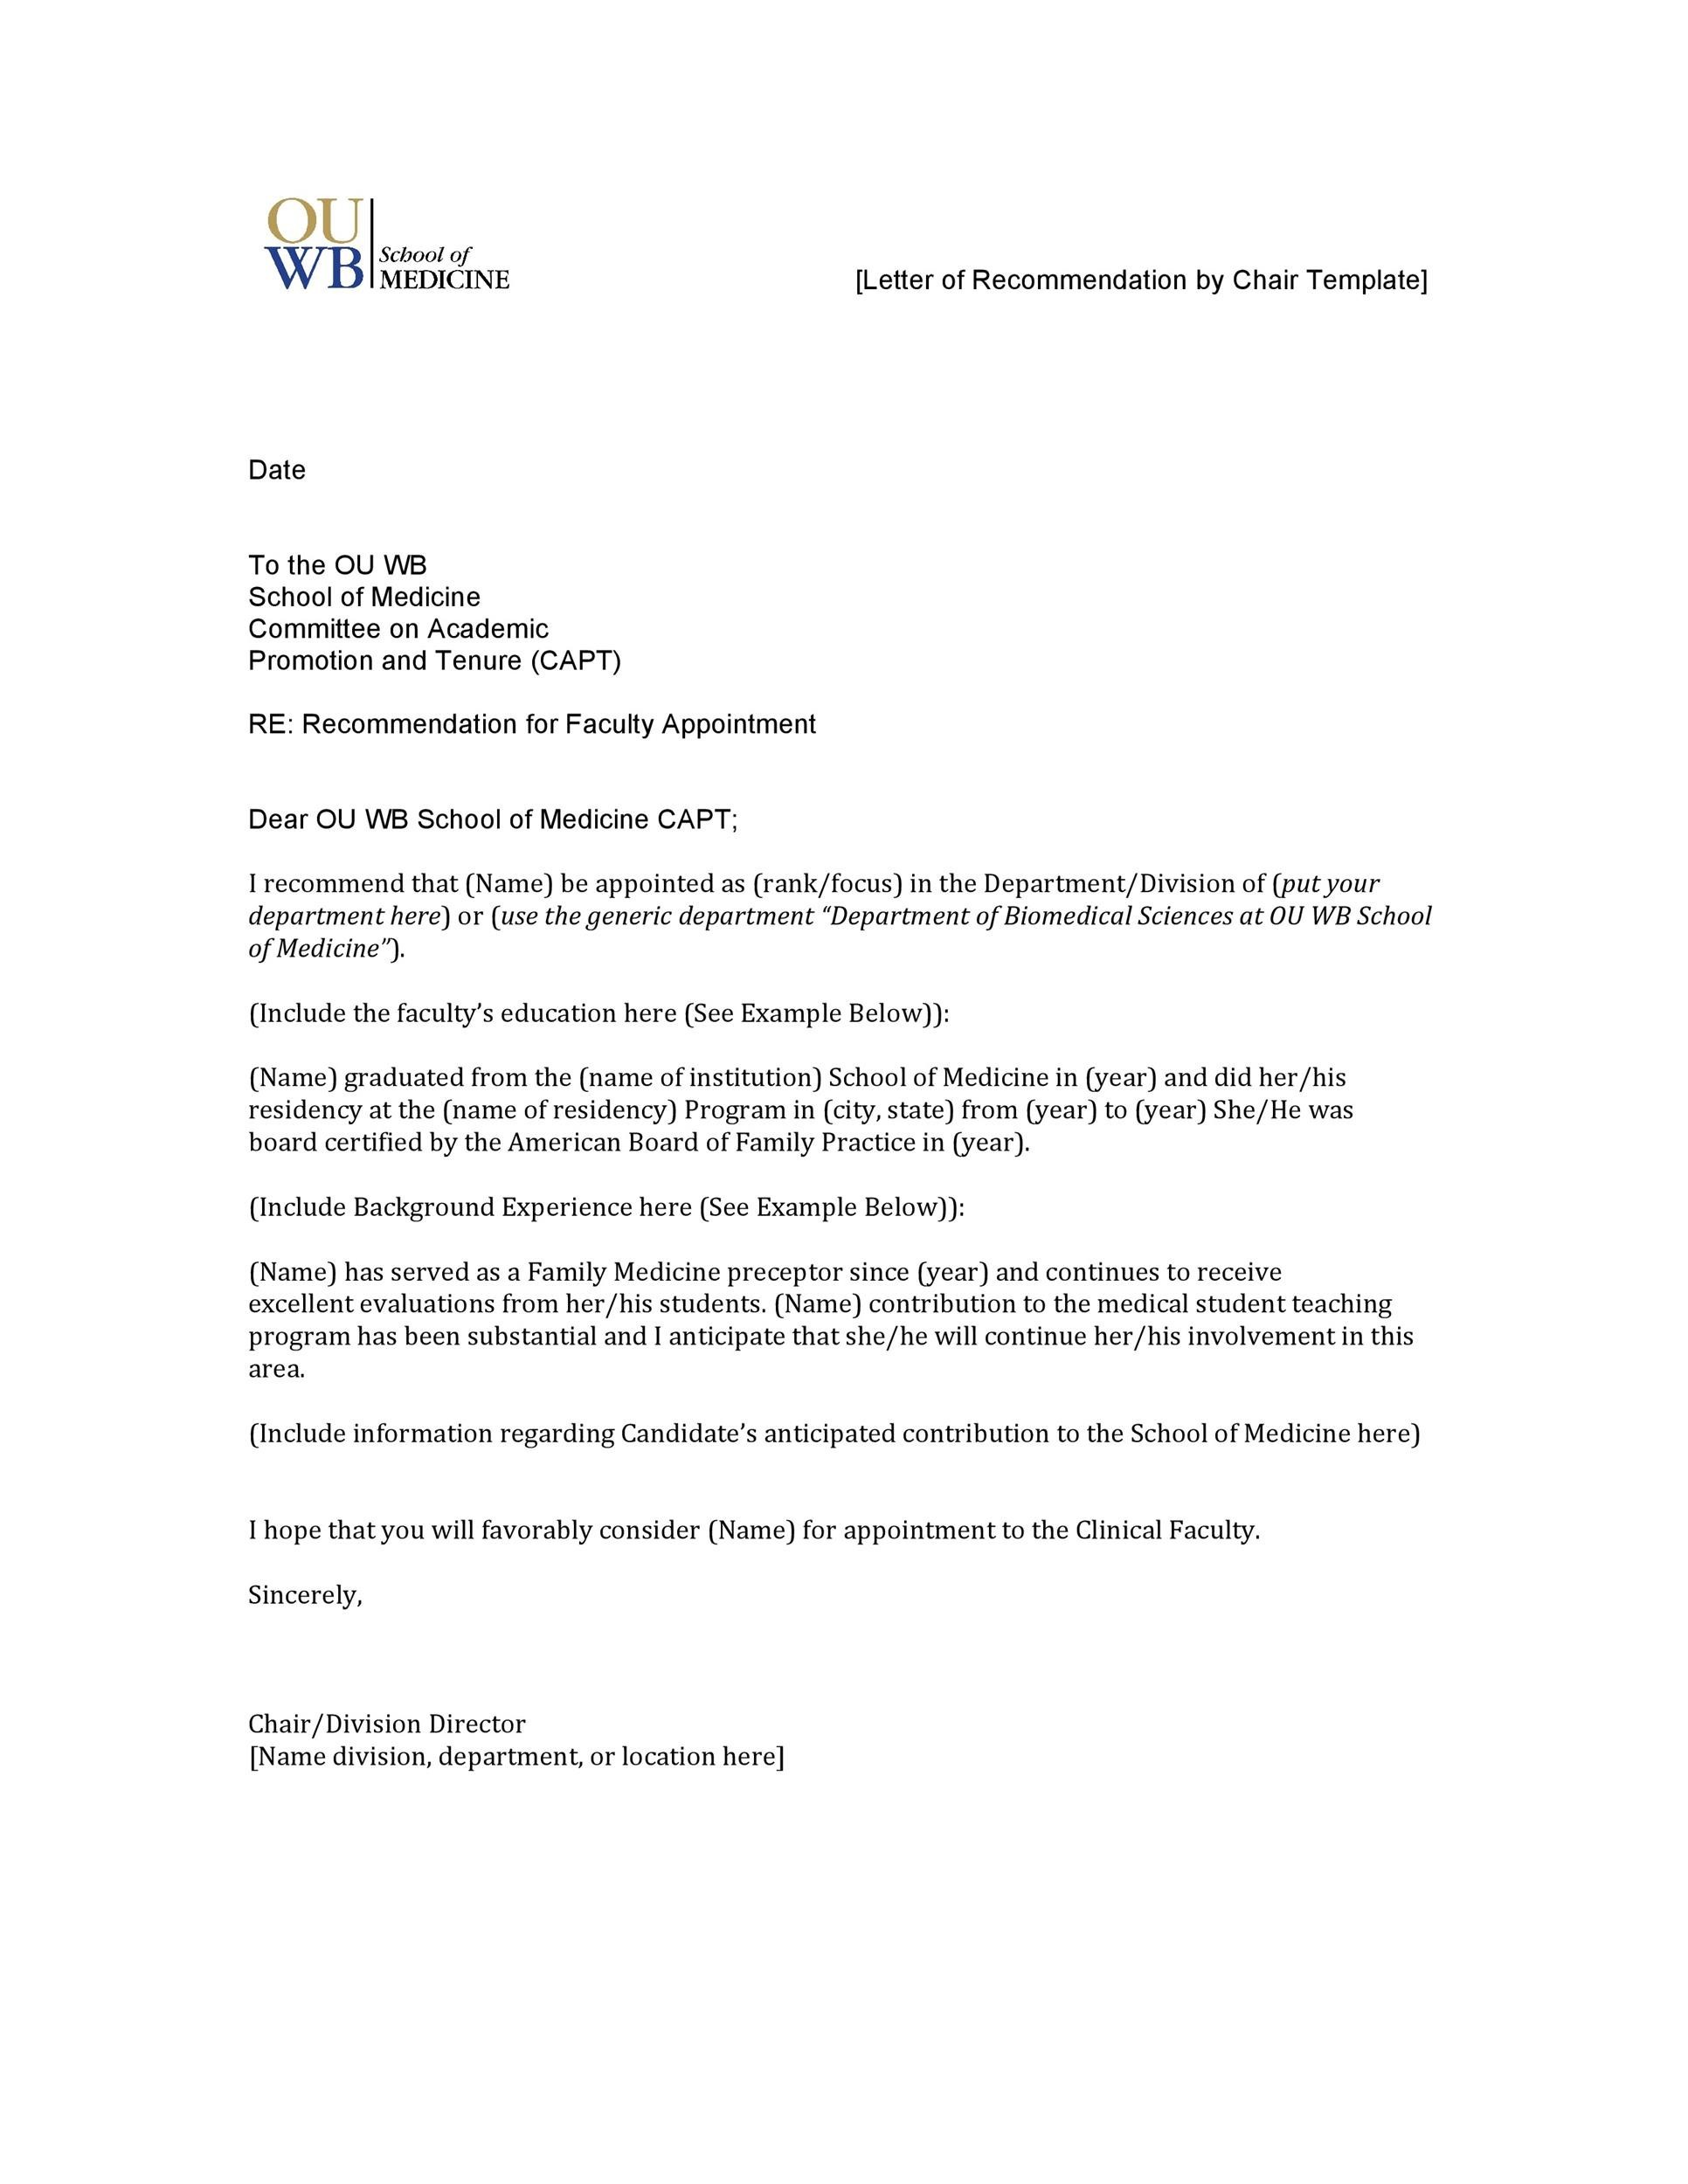 Emigrate or immigrate: Recommendation letter With Letter Of Recomendation Template